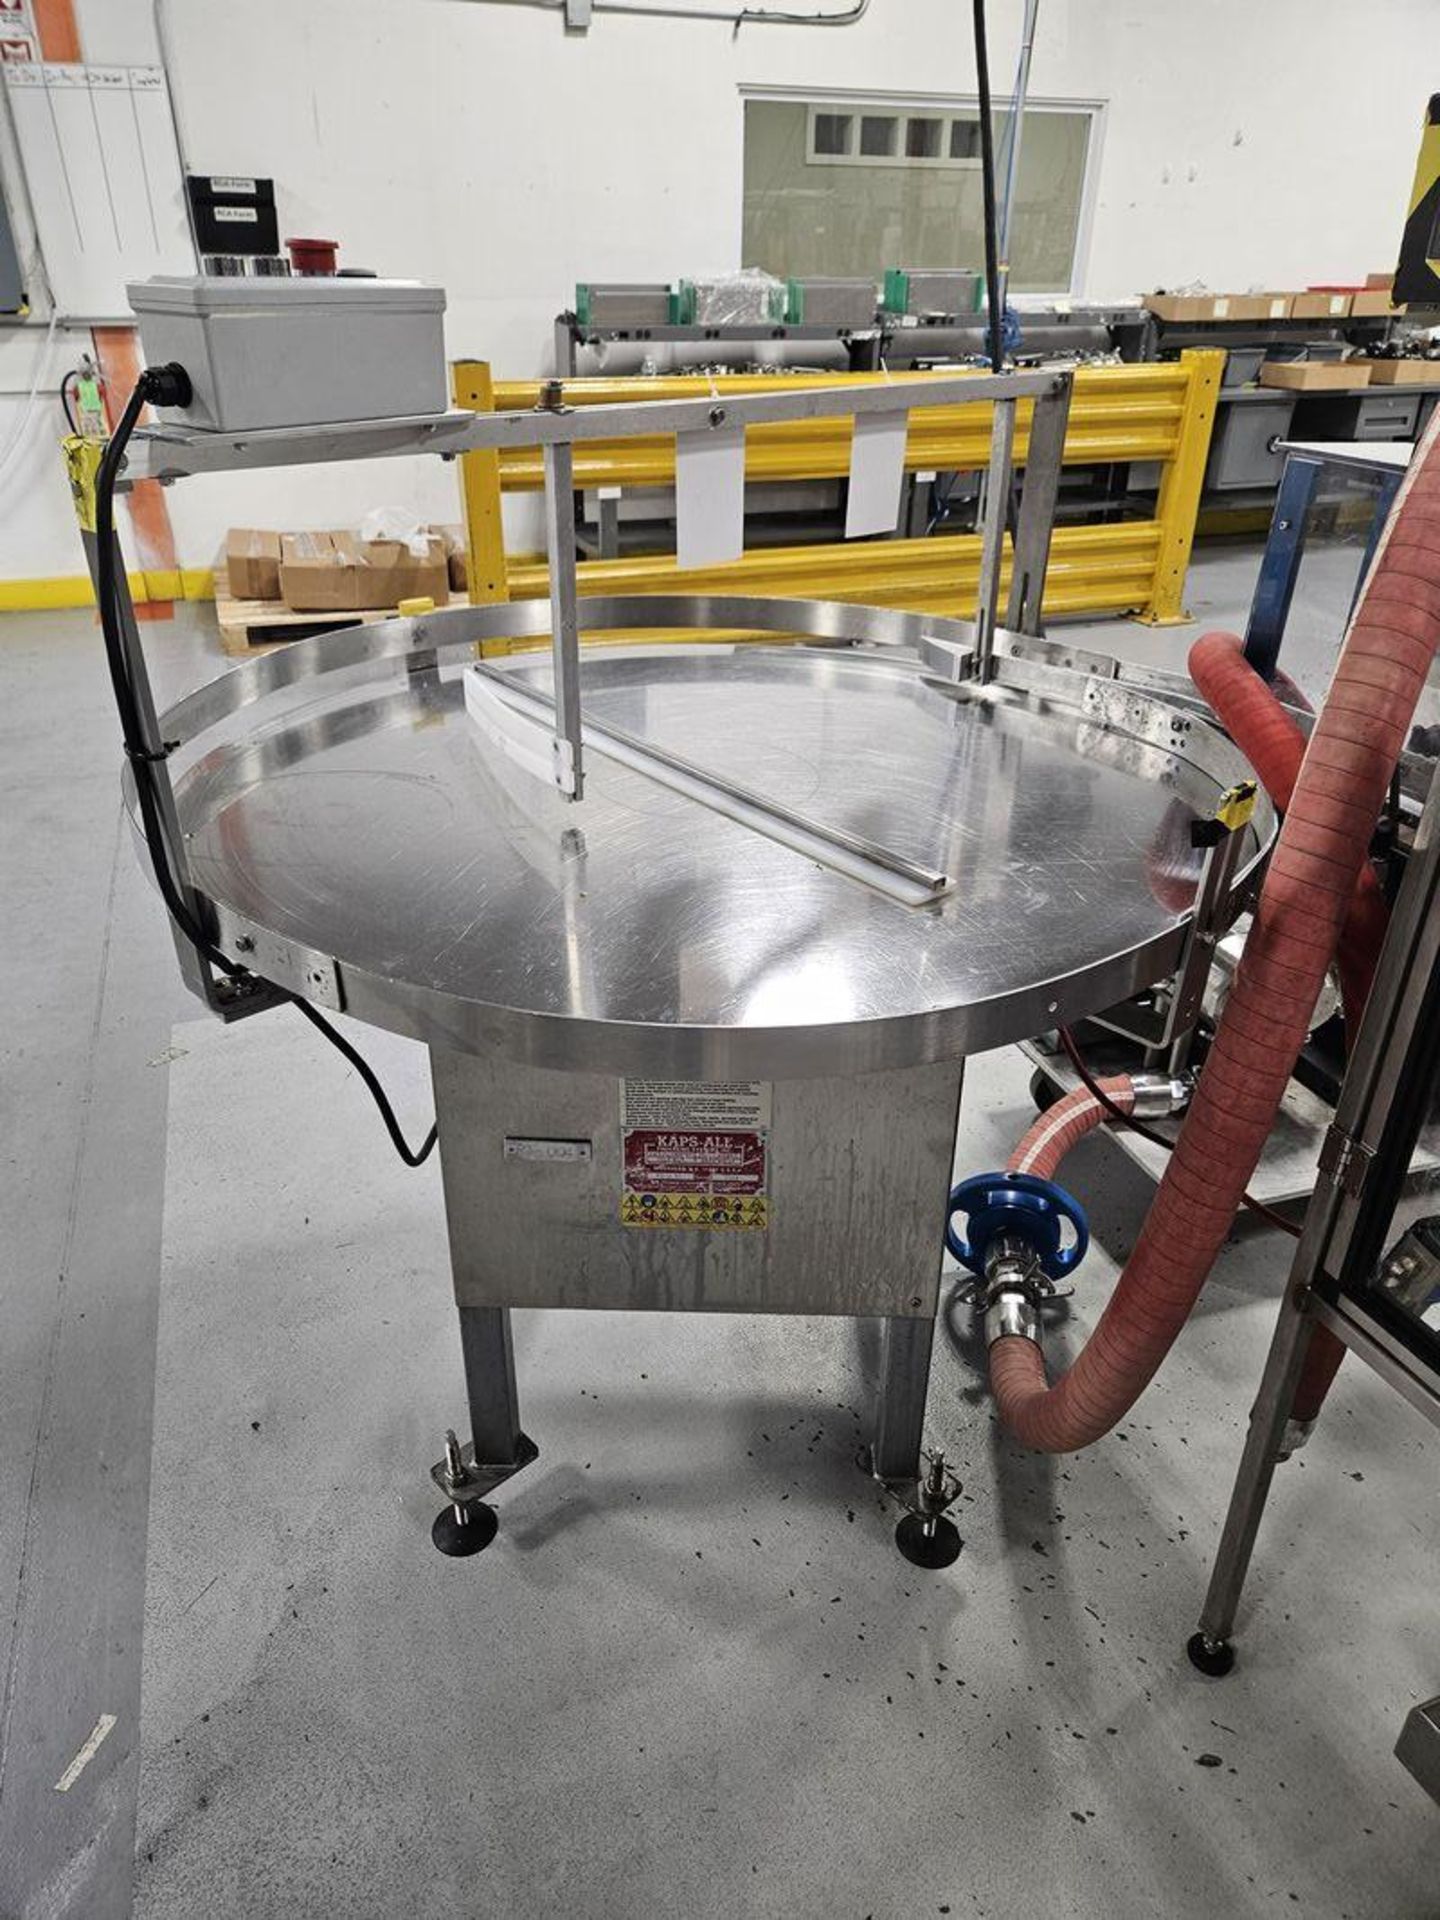 Kaps-All FS-U 48 48" Stainless Steel Rotary Accumulation Table - Image 2 of 2